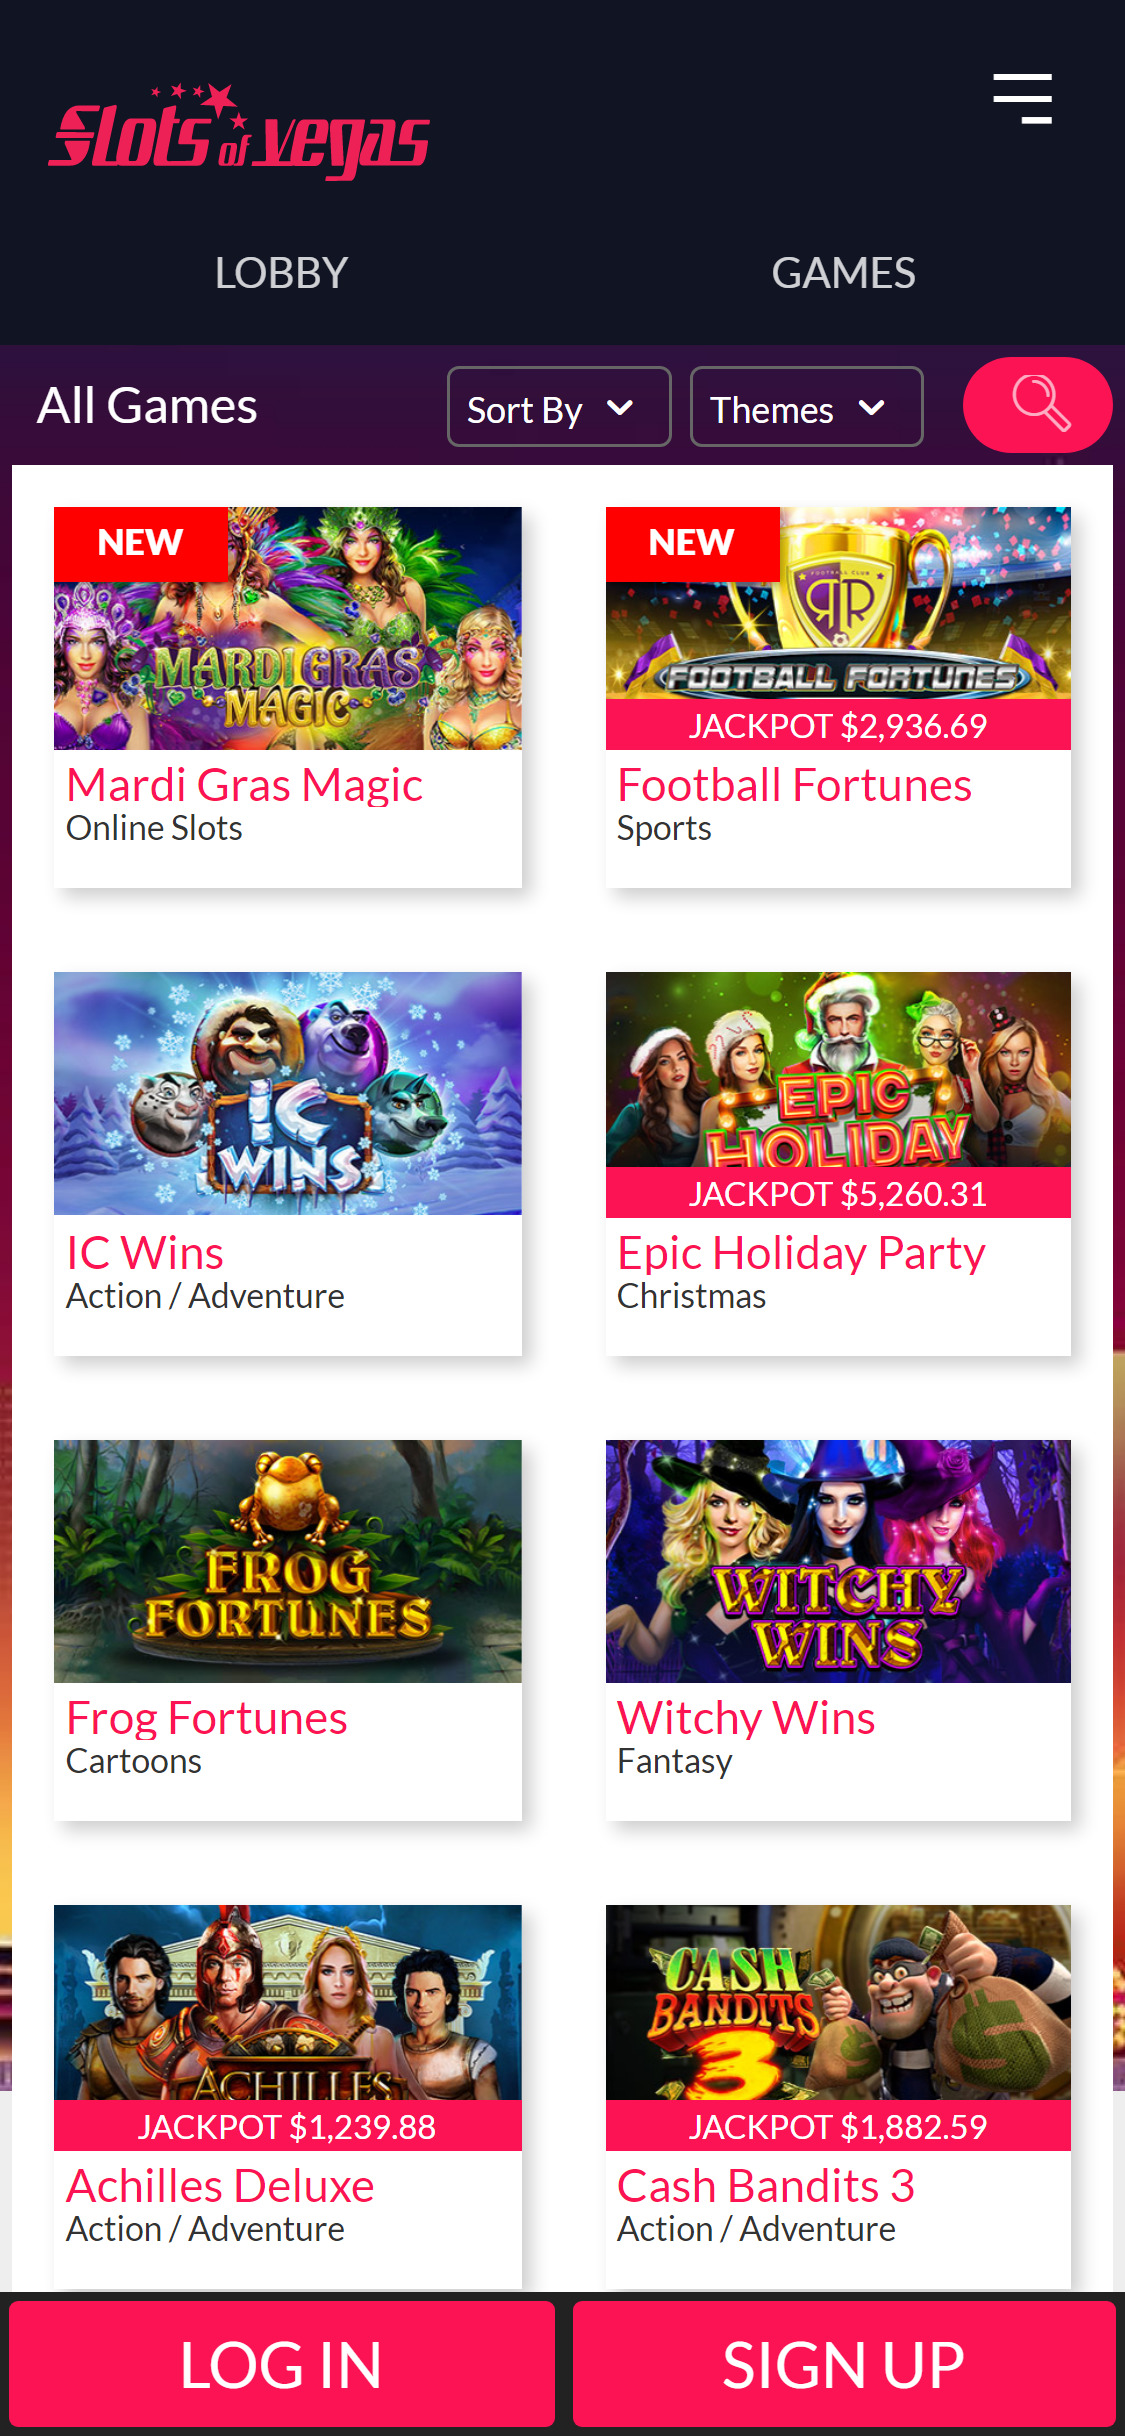 Slots of Vegas Casino Mobile Games Review